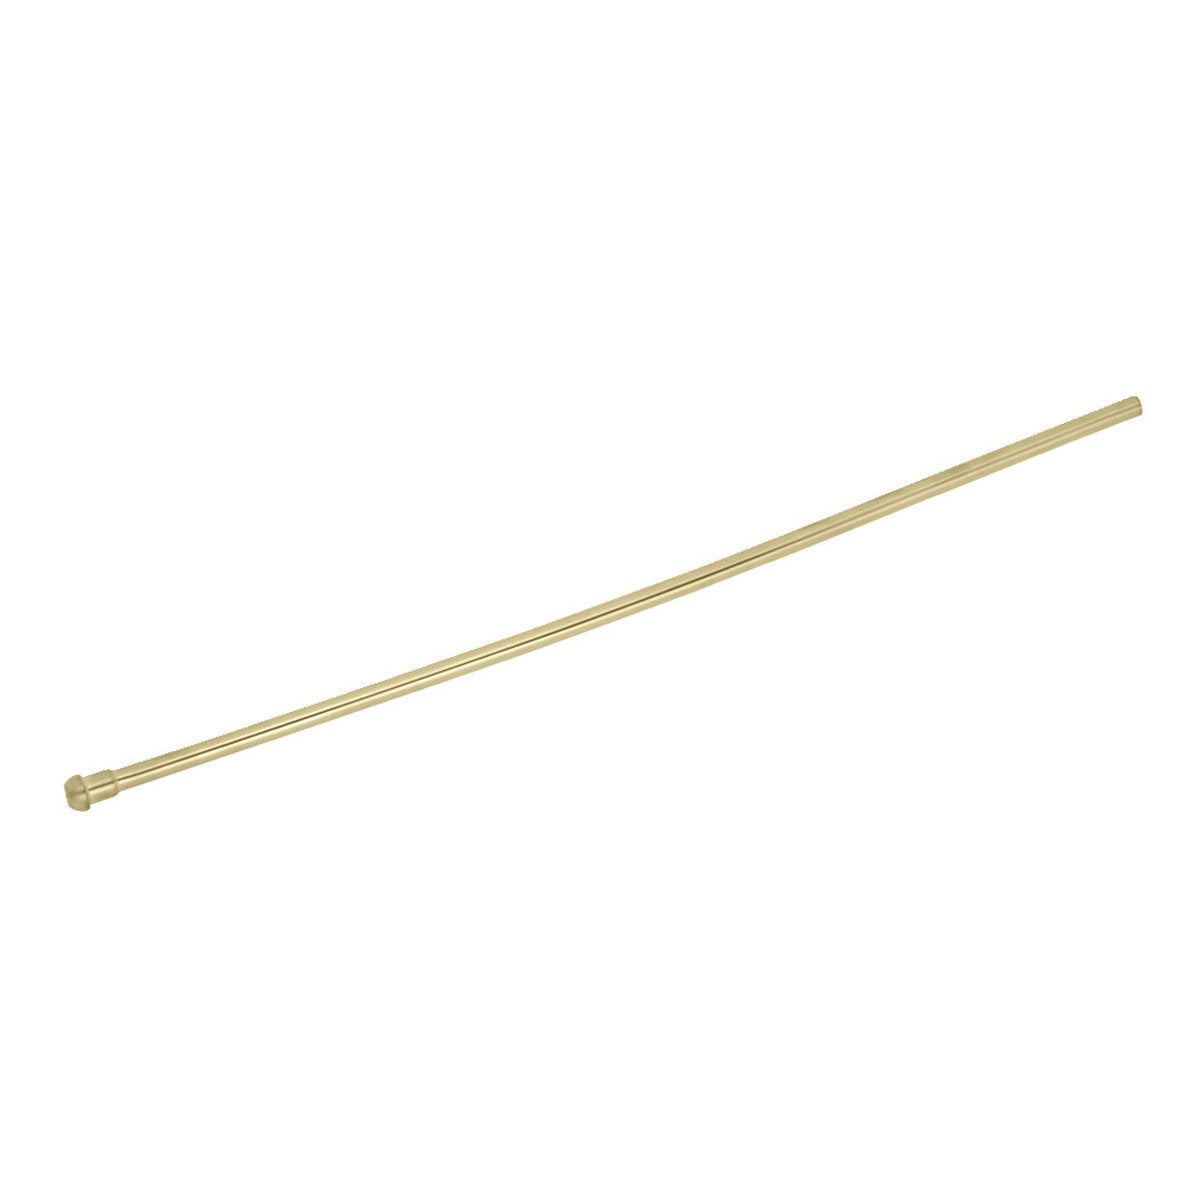 Kingston Brass Complement 20 in. Bullnose Bathroom Supply Line